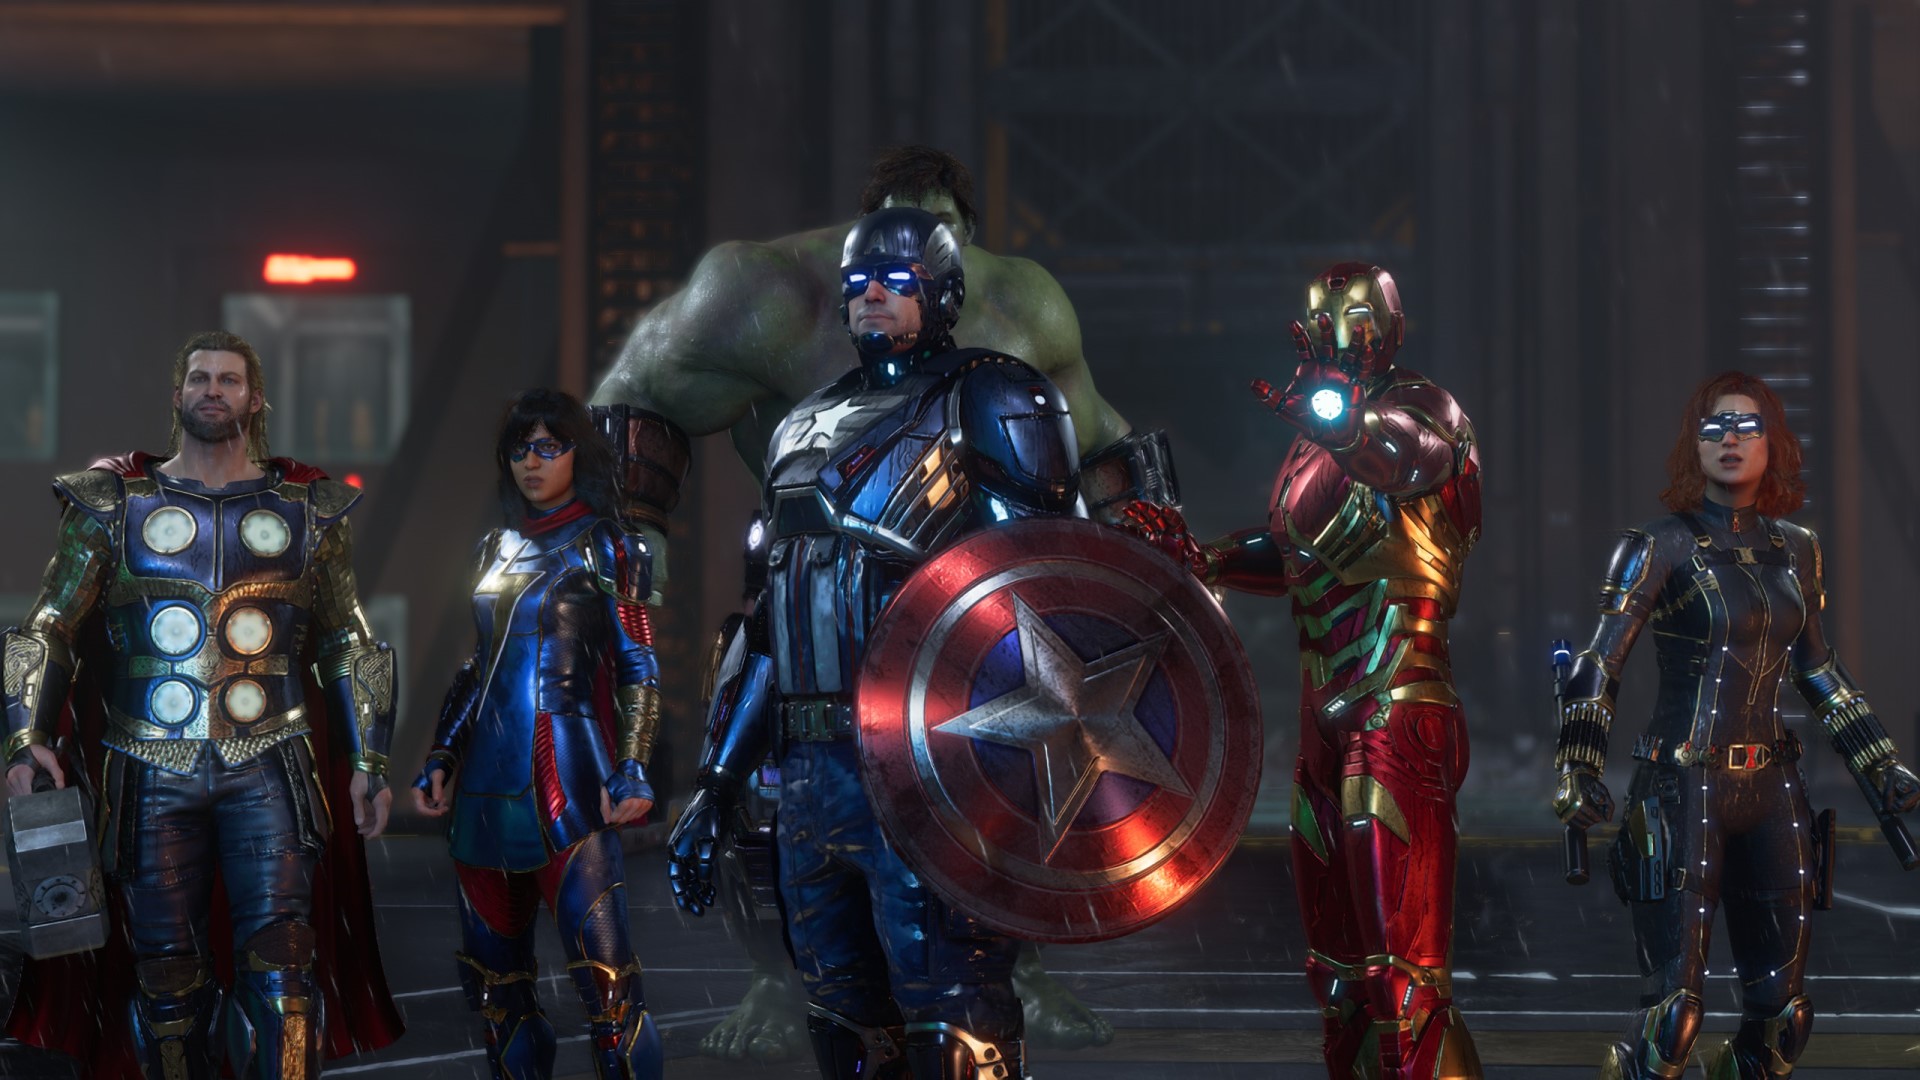 Marvel's Avengers is coming to Game Pass this month